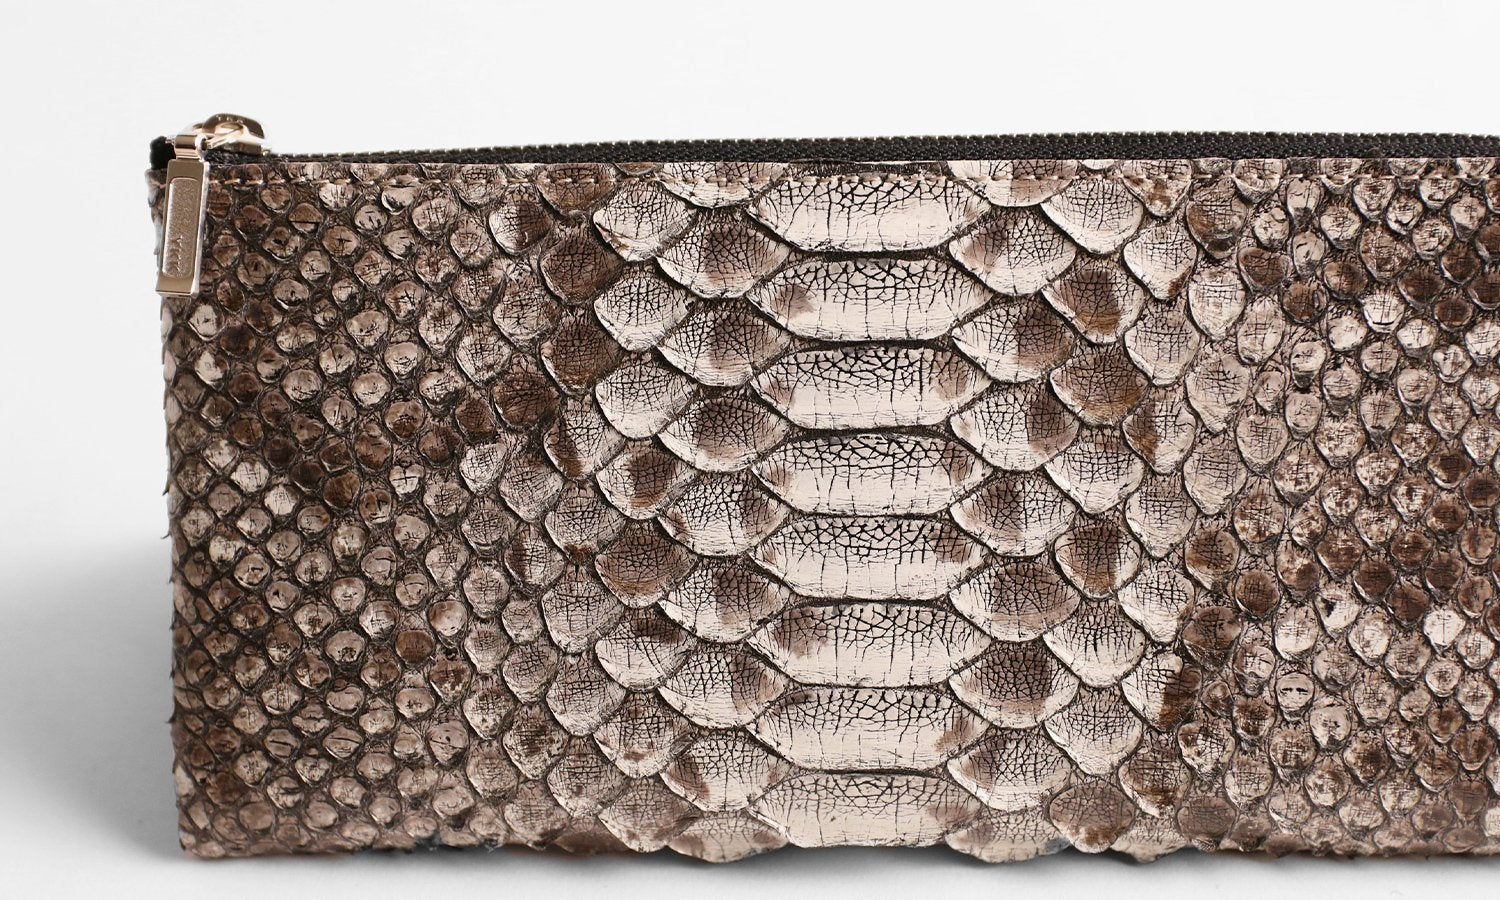 FU-SI FERNALLE / TOPAZ PYTHON wallet collection Beautiful Python L zipper long wallet made in Japan